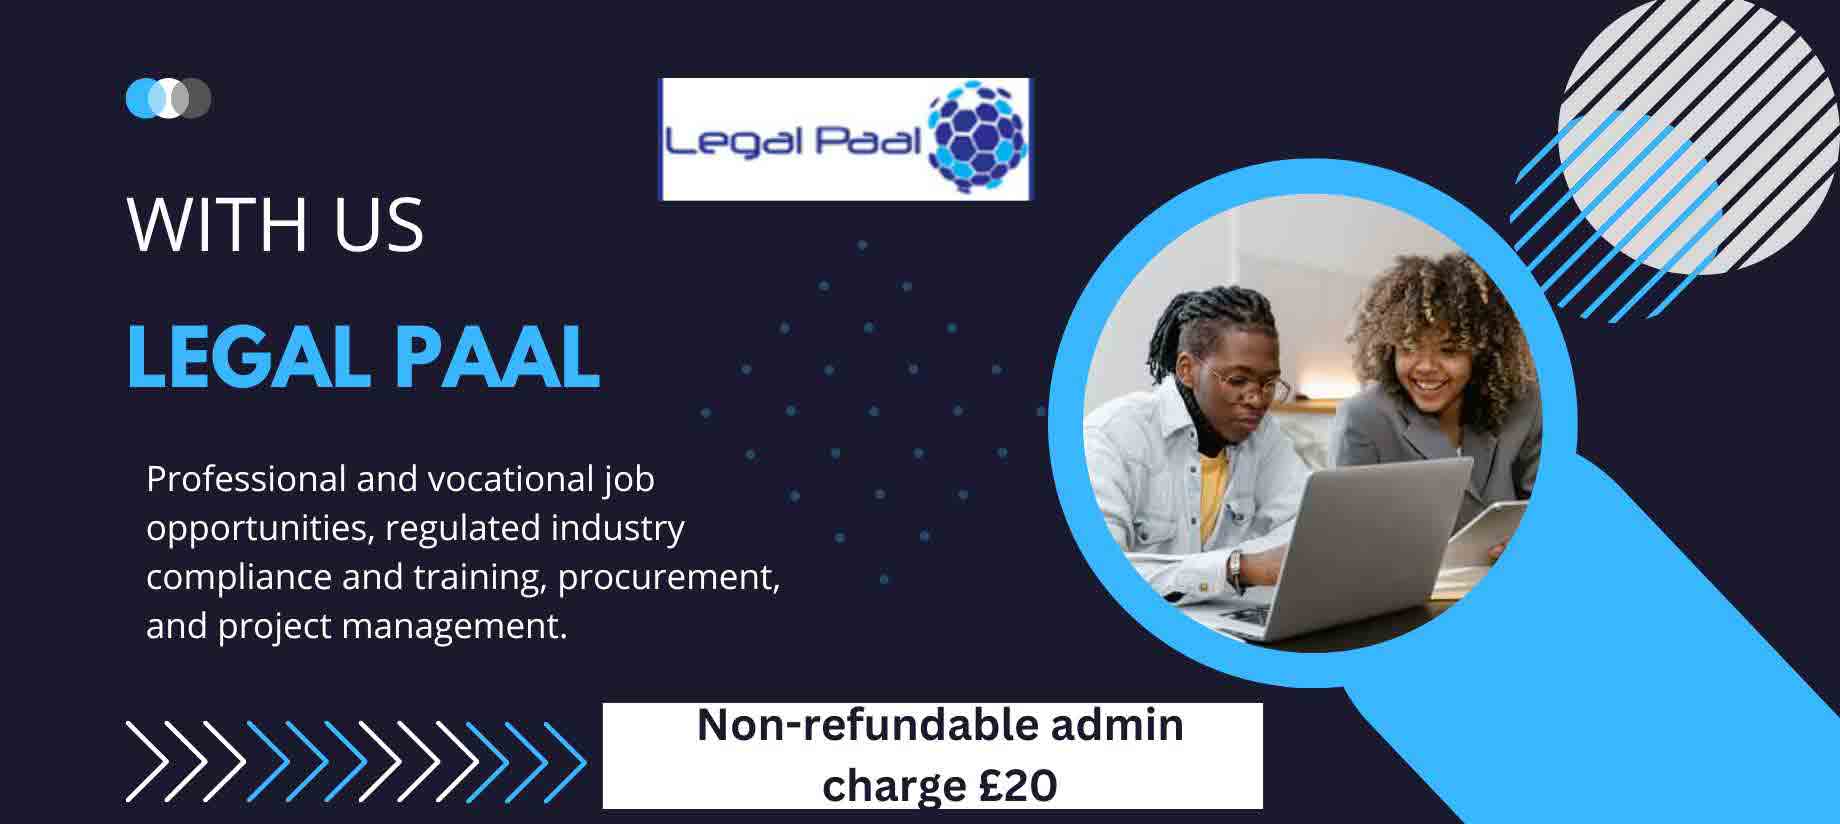 Non-refundable admin charge £20 - Banner Image on Legal Paal